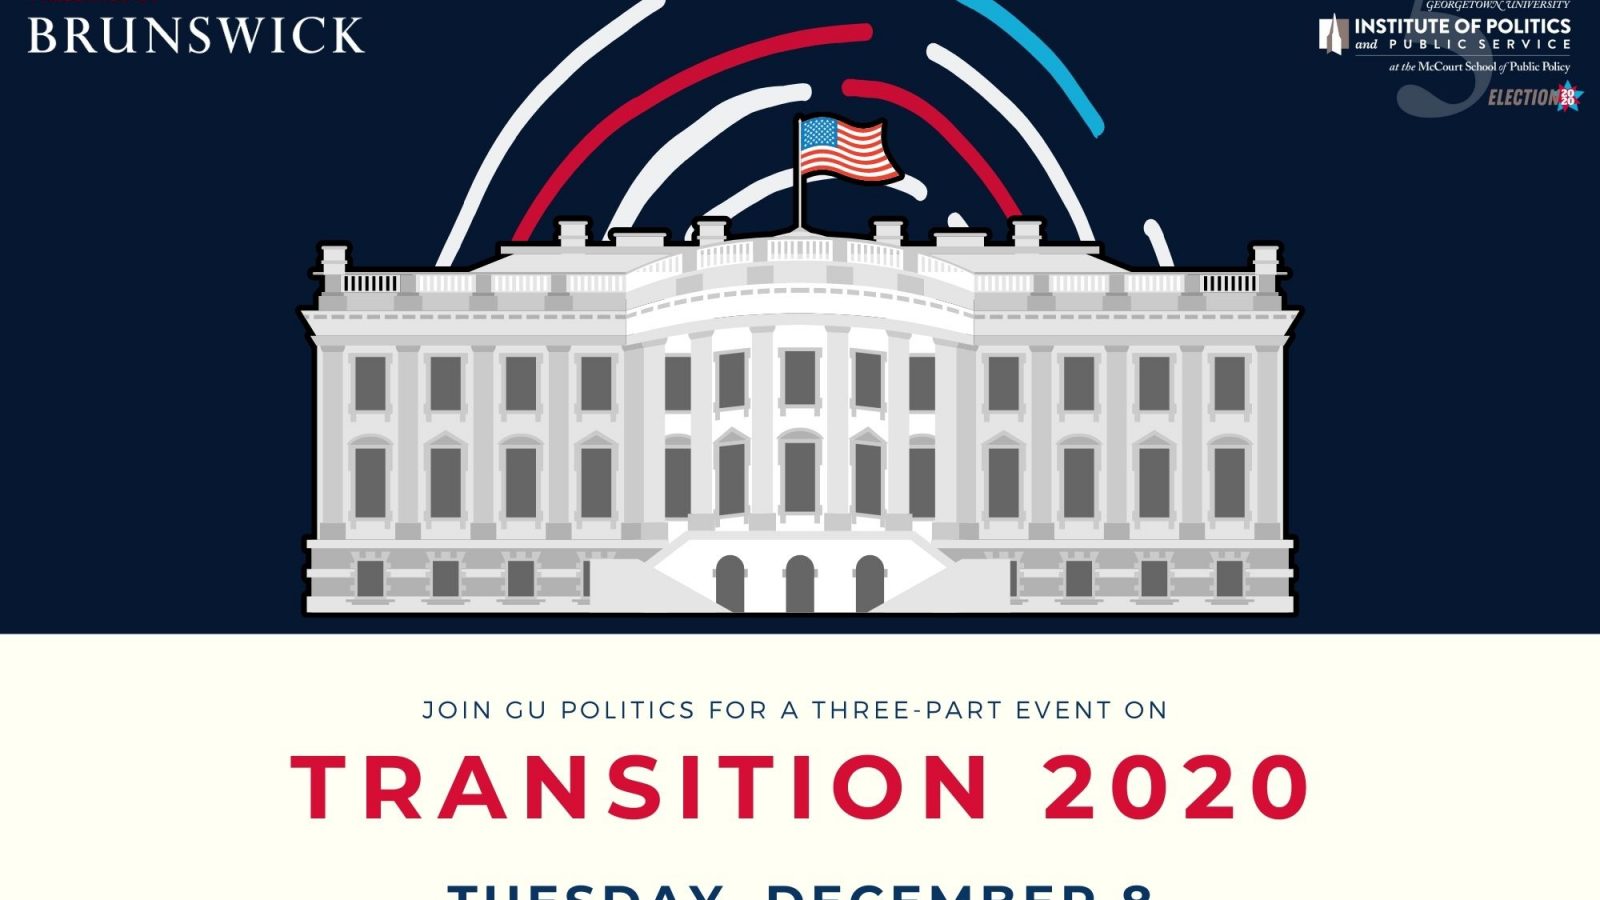 Georgetown Institute of Politics and Public Service (GU Politics) on Tuesday, December 8 for a three-part event, &quot;Transition 2020,&quot; presented by Brunswick Group.